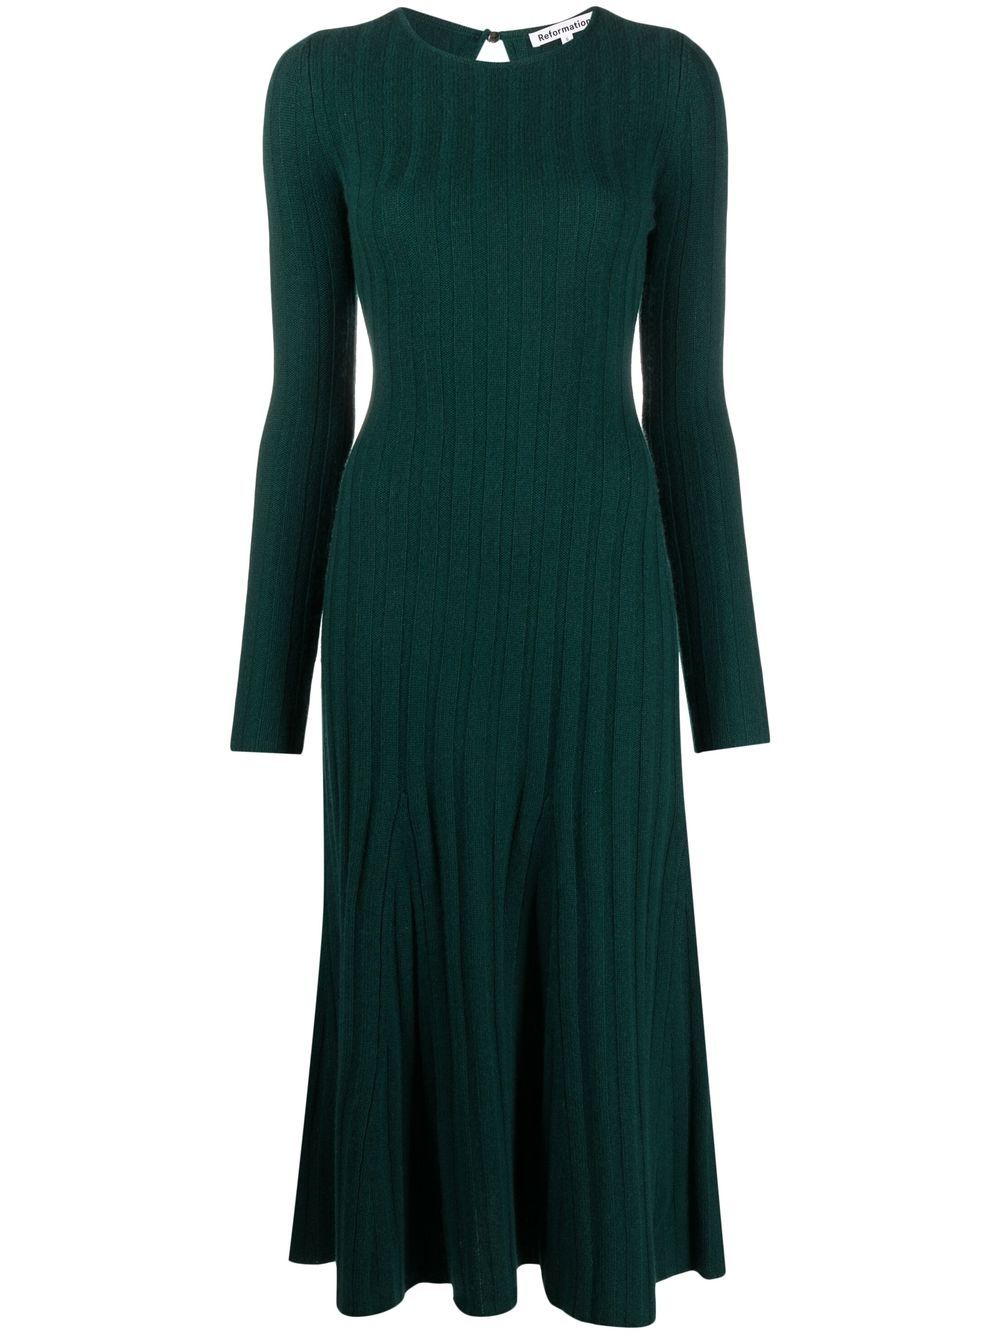 Reformation long-sleeve knitted dress - Green